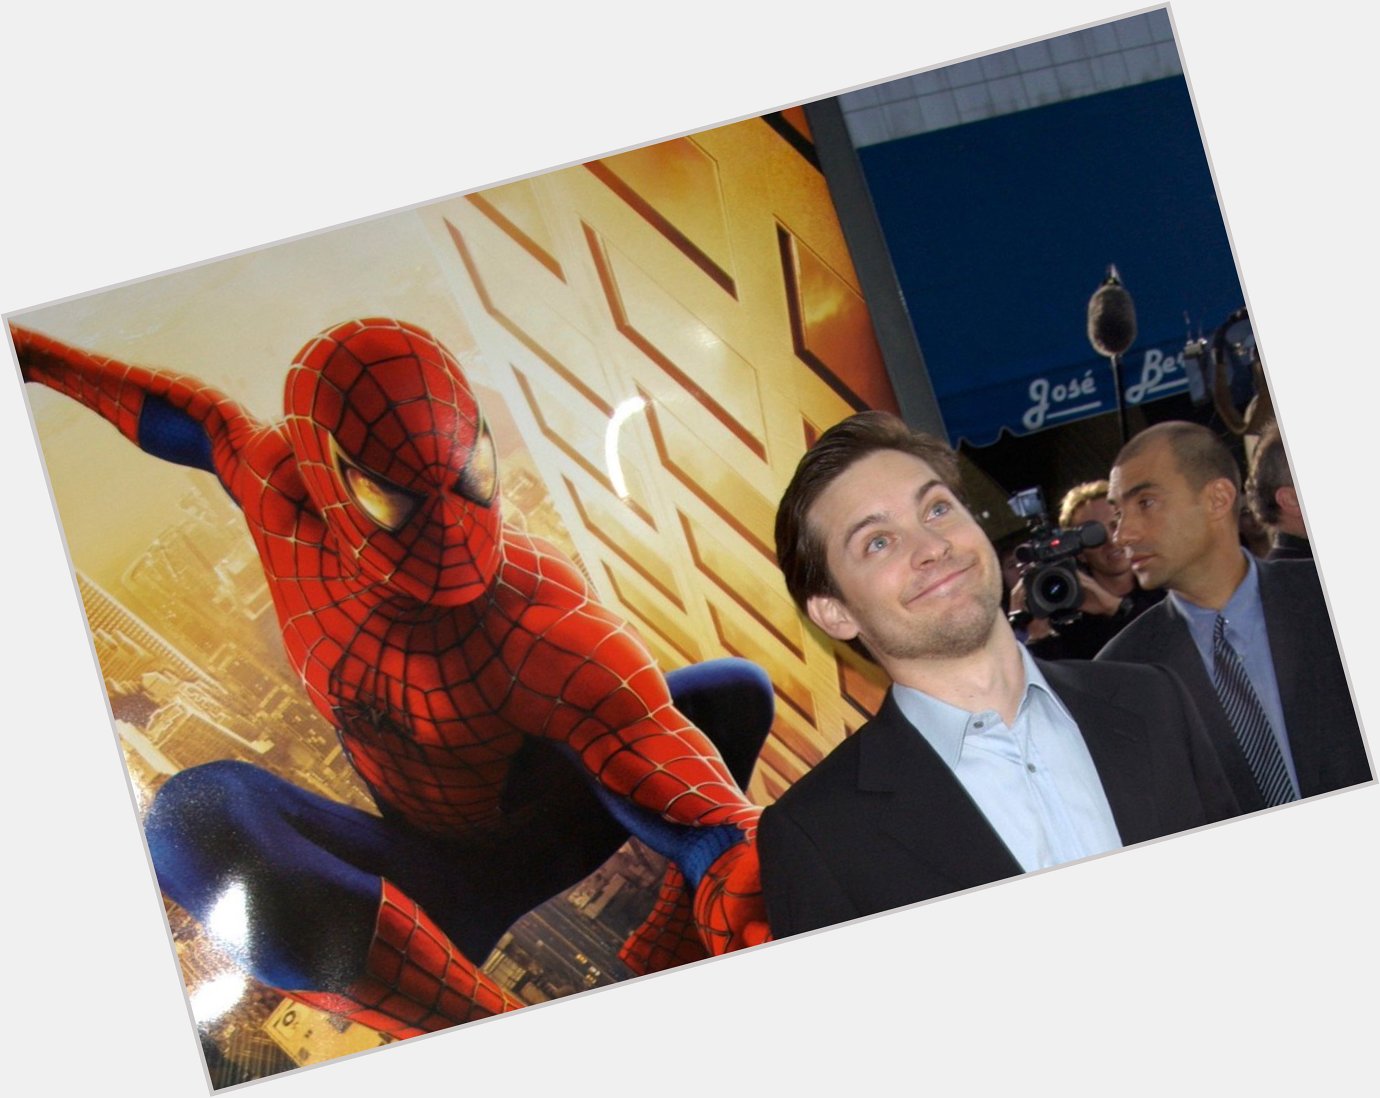 Happy 43rd Birthday to the OG Spider-Man that started it all, Tobey Maguire! 